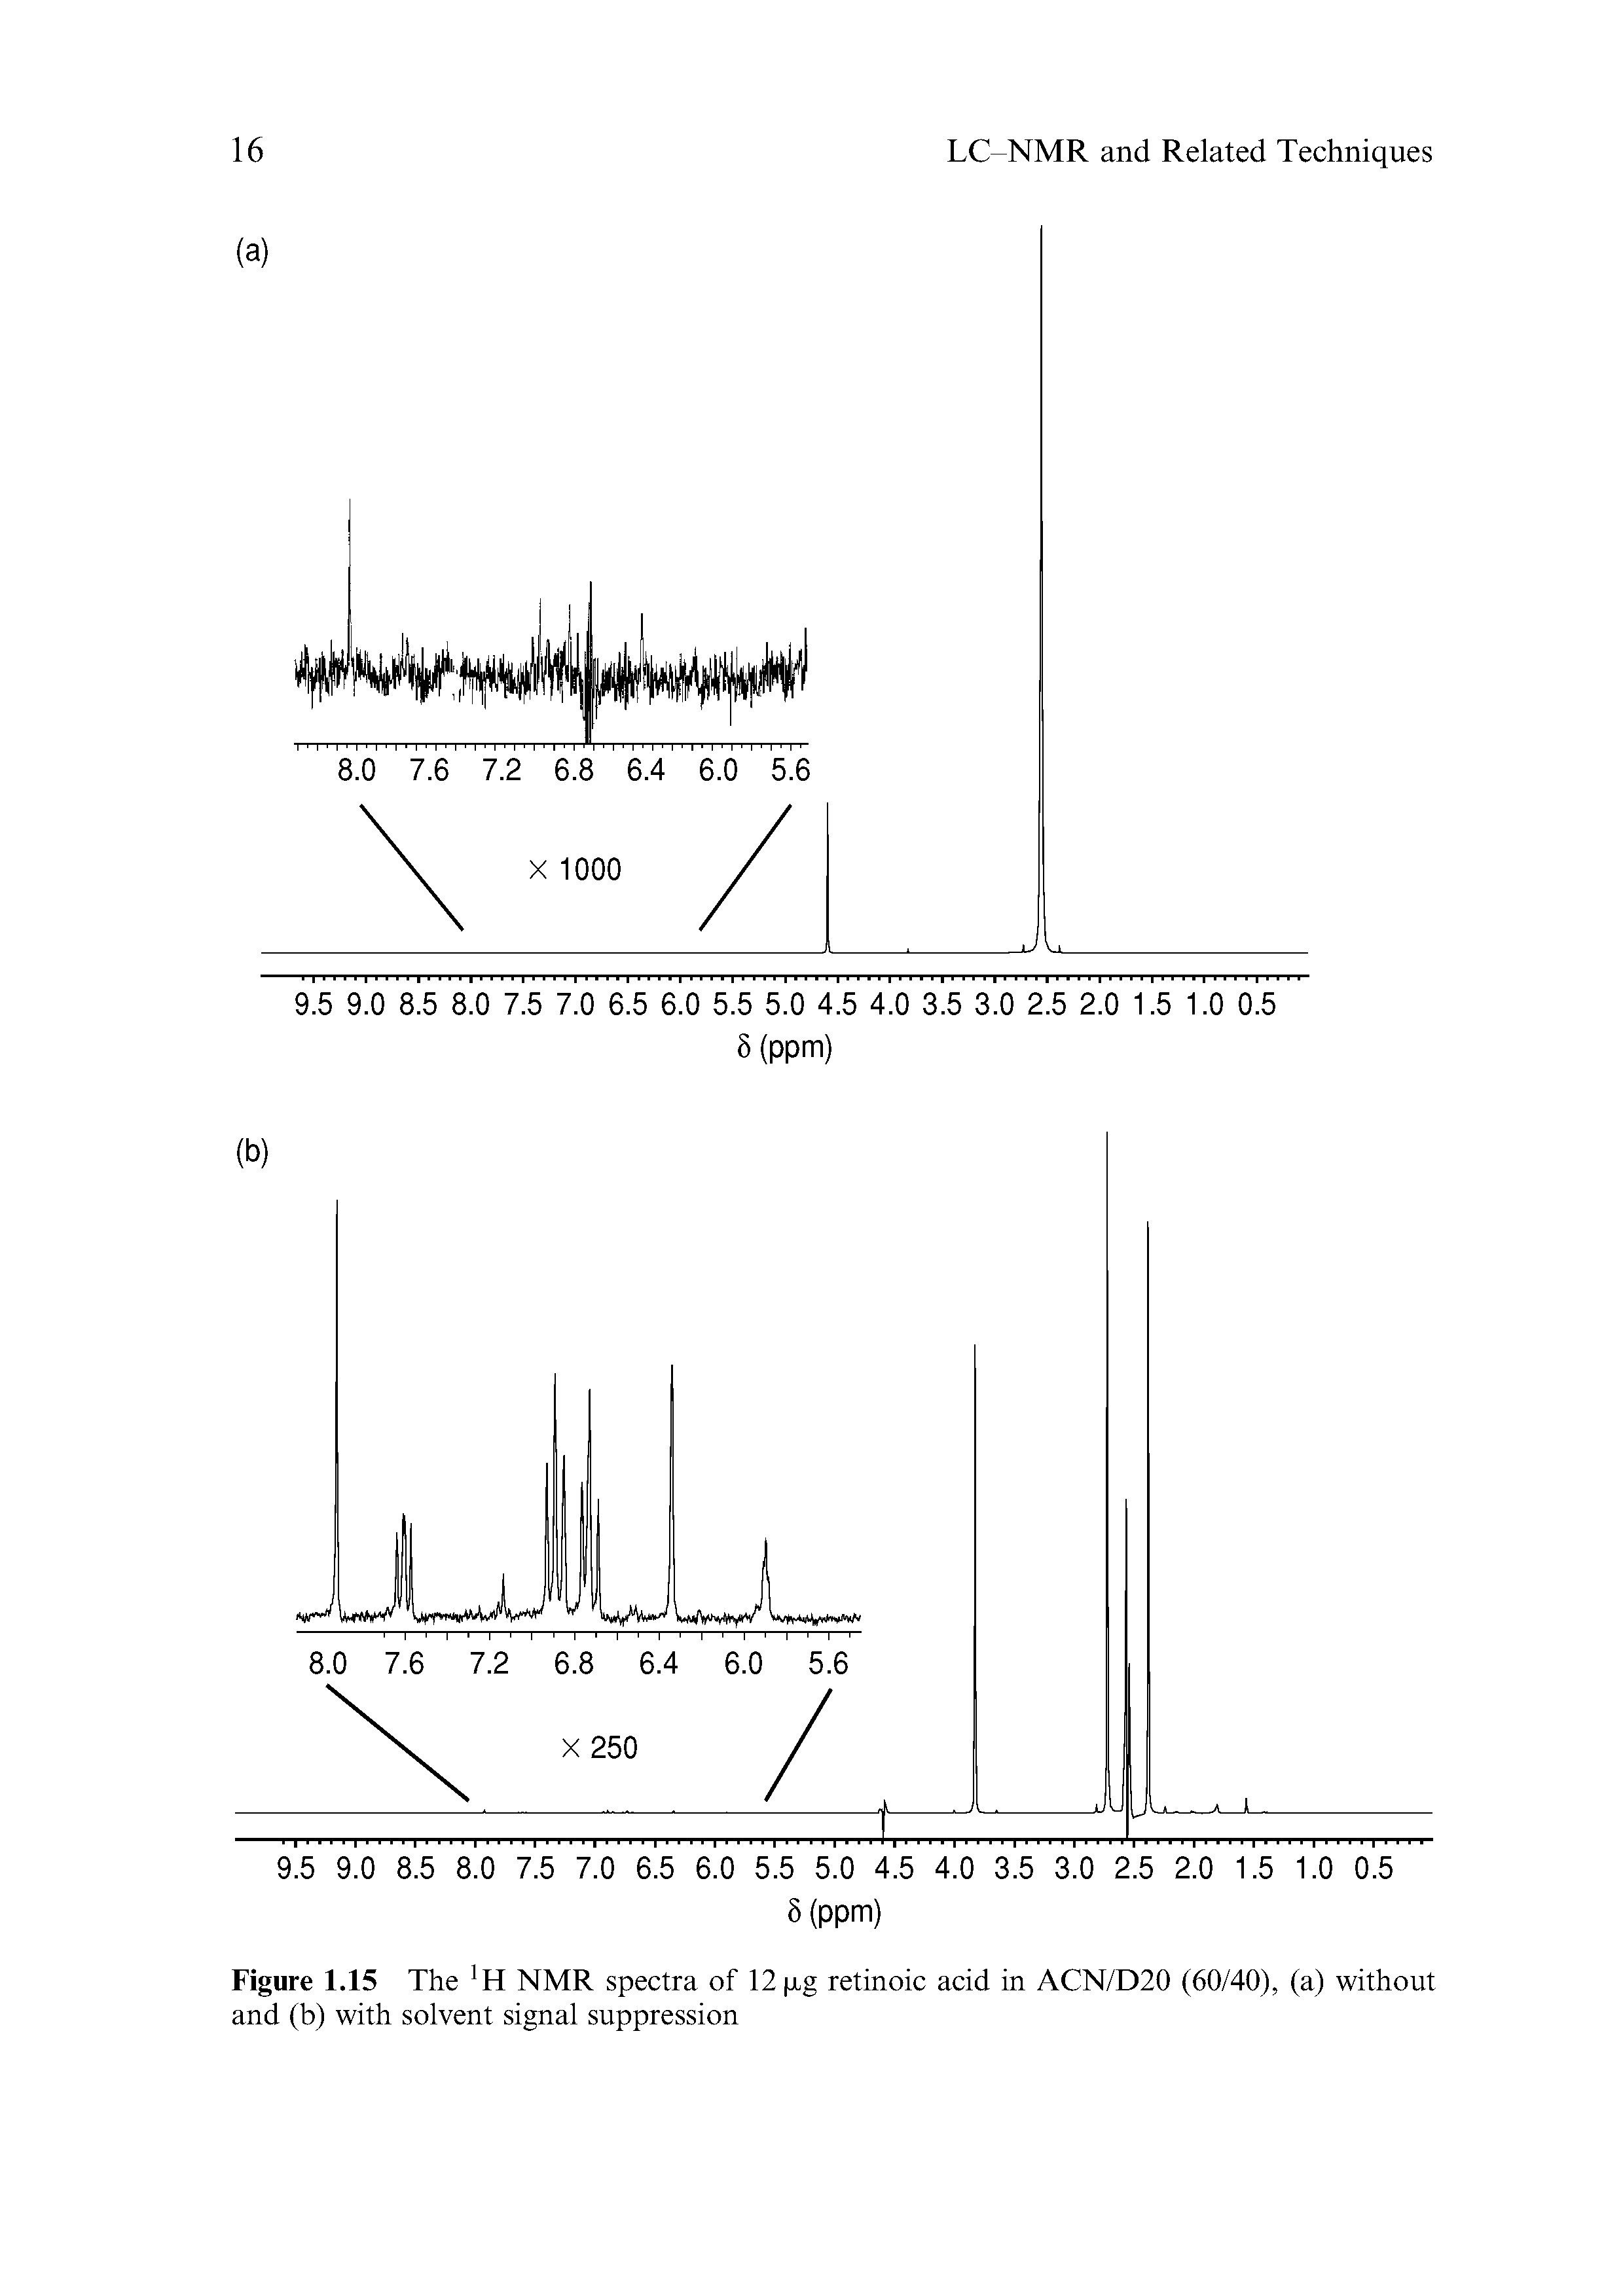 Figure 1.15 The 1 H NMR spectra of 12 xg retinoic acid in ACN/D20 (60/40), (a) without and (b) with solvent signal suppression...